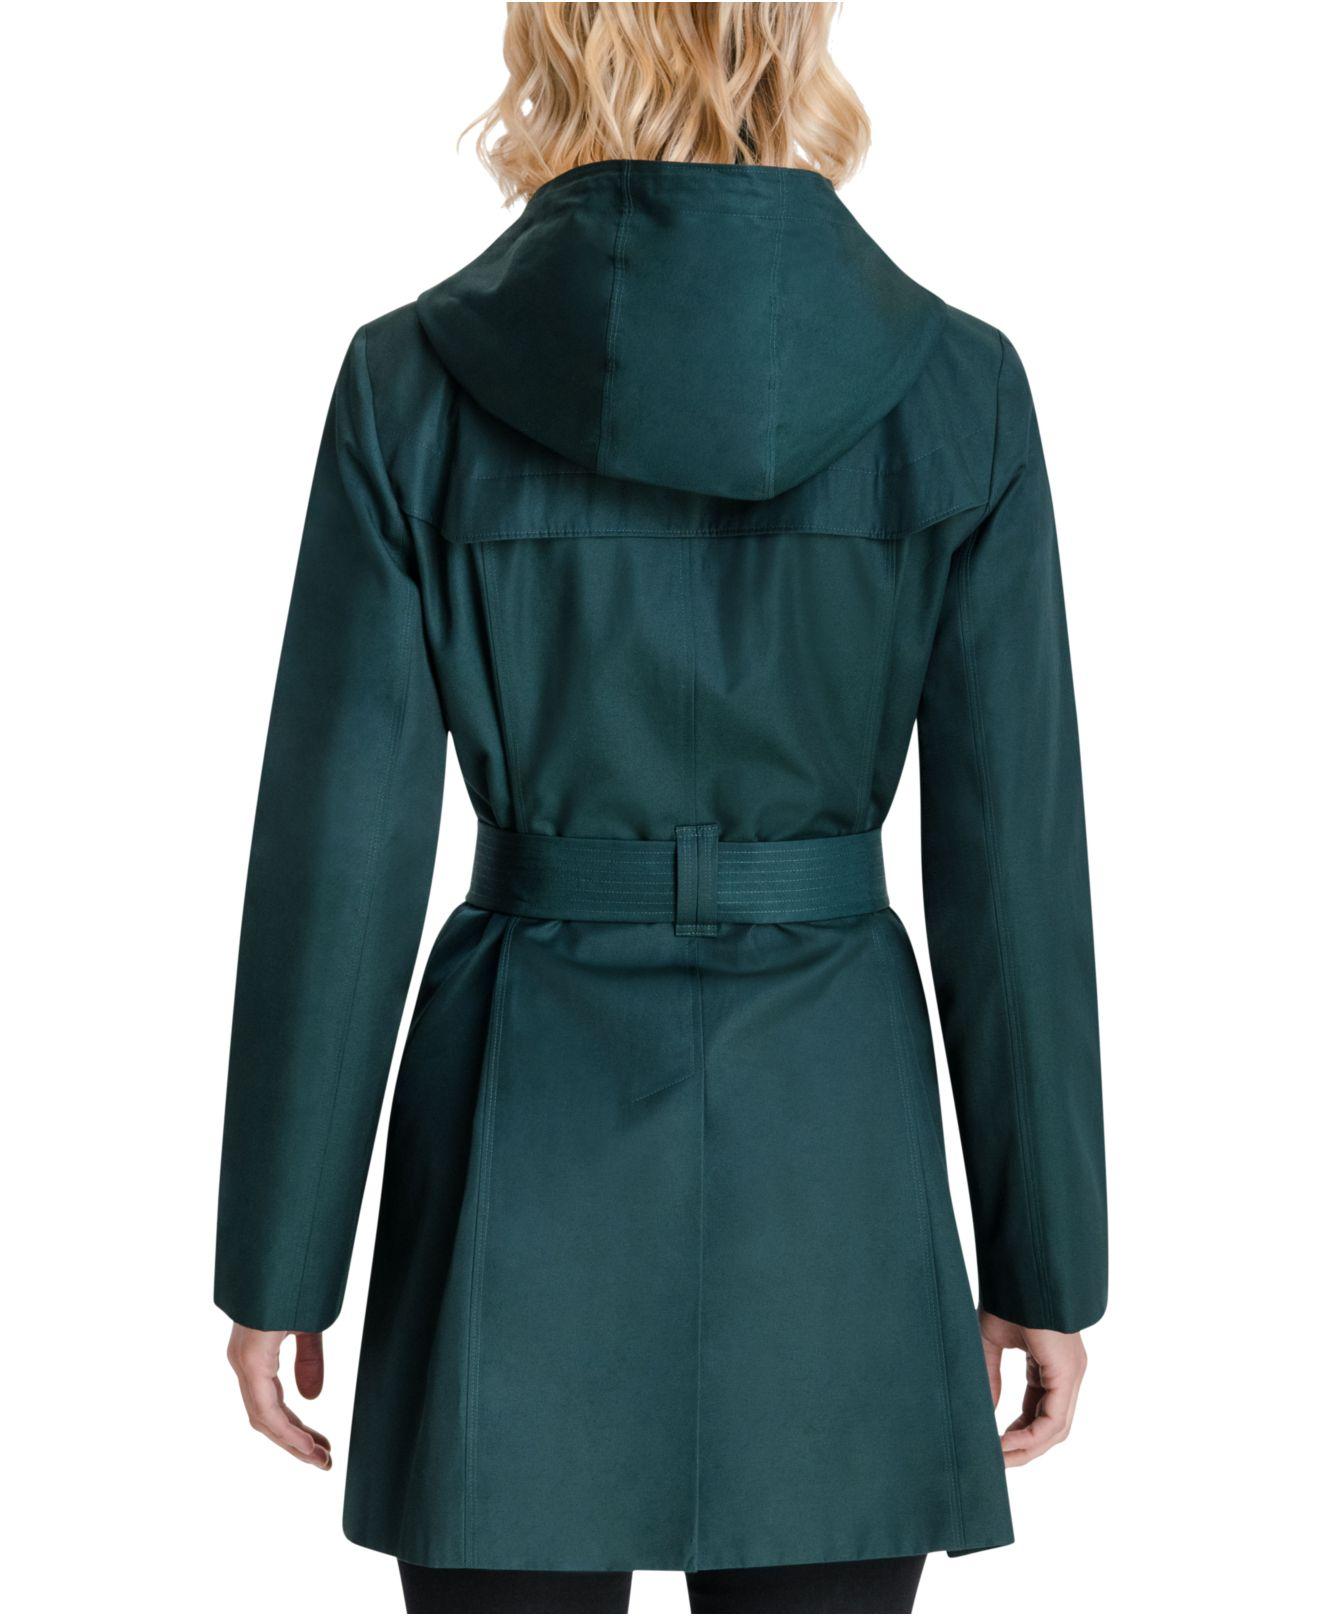 London Fog Cotton Petite Hooded Belted Raincoat in Green - Lyst